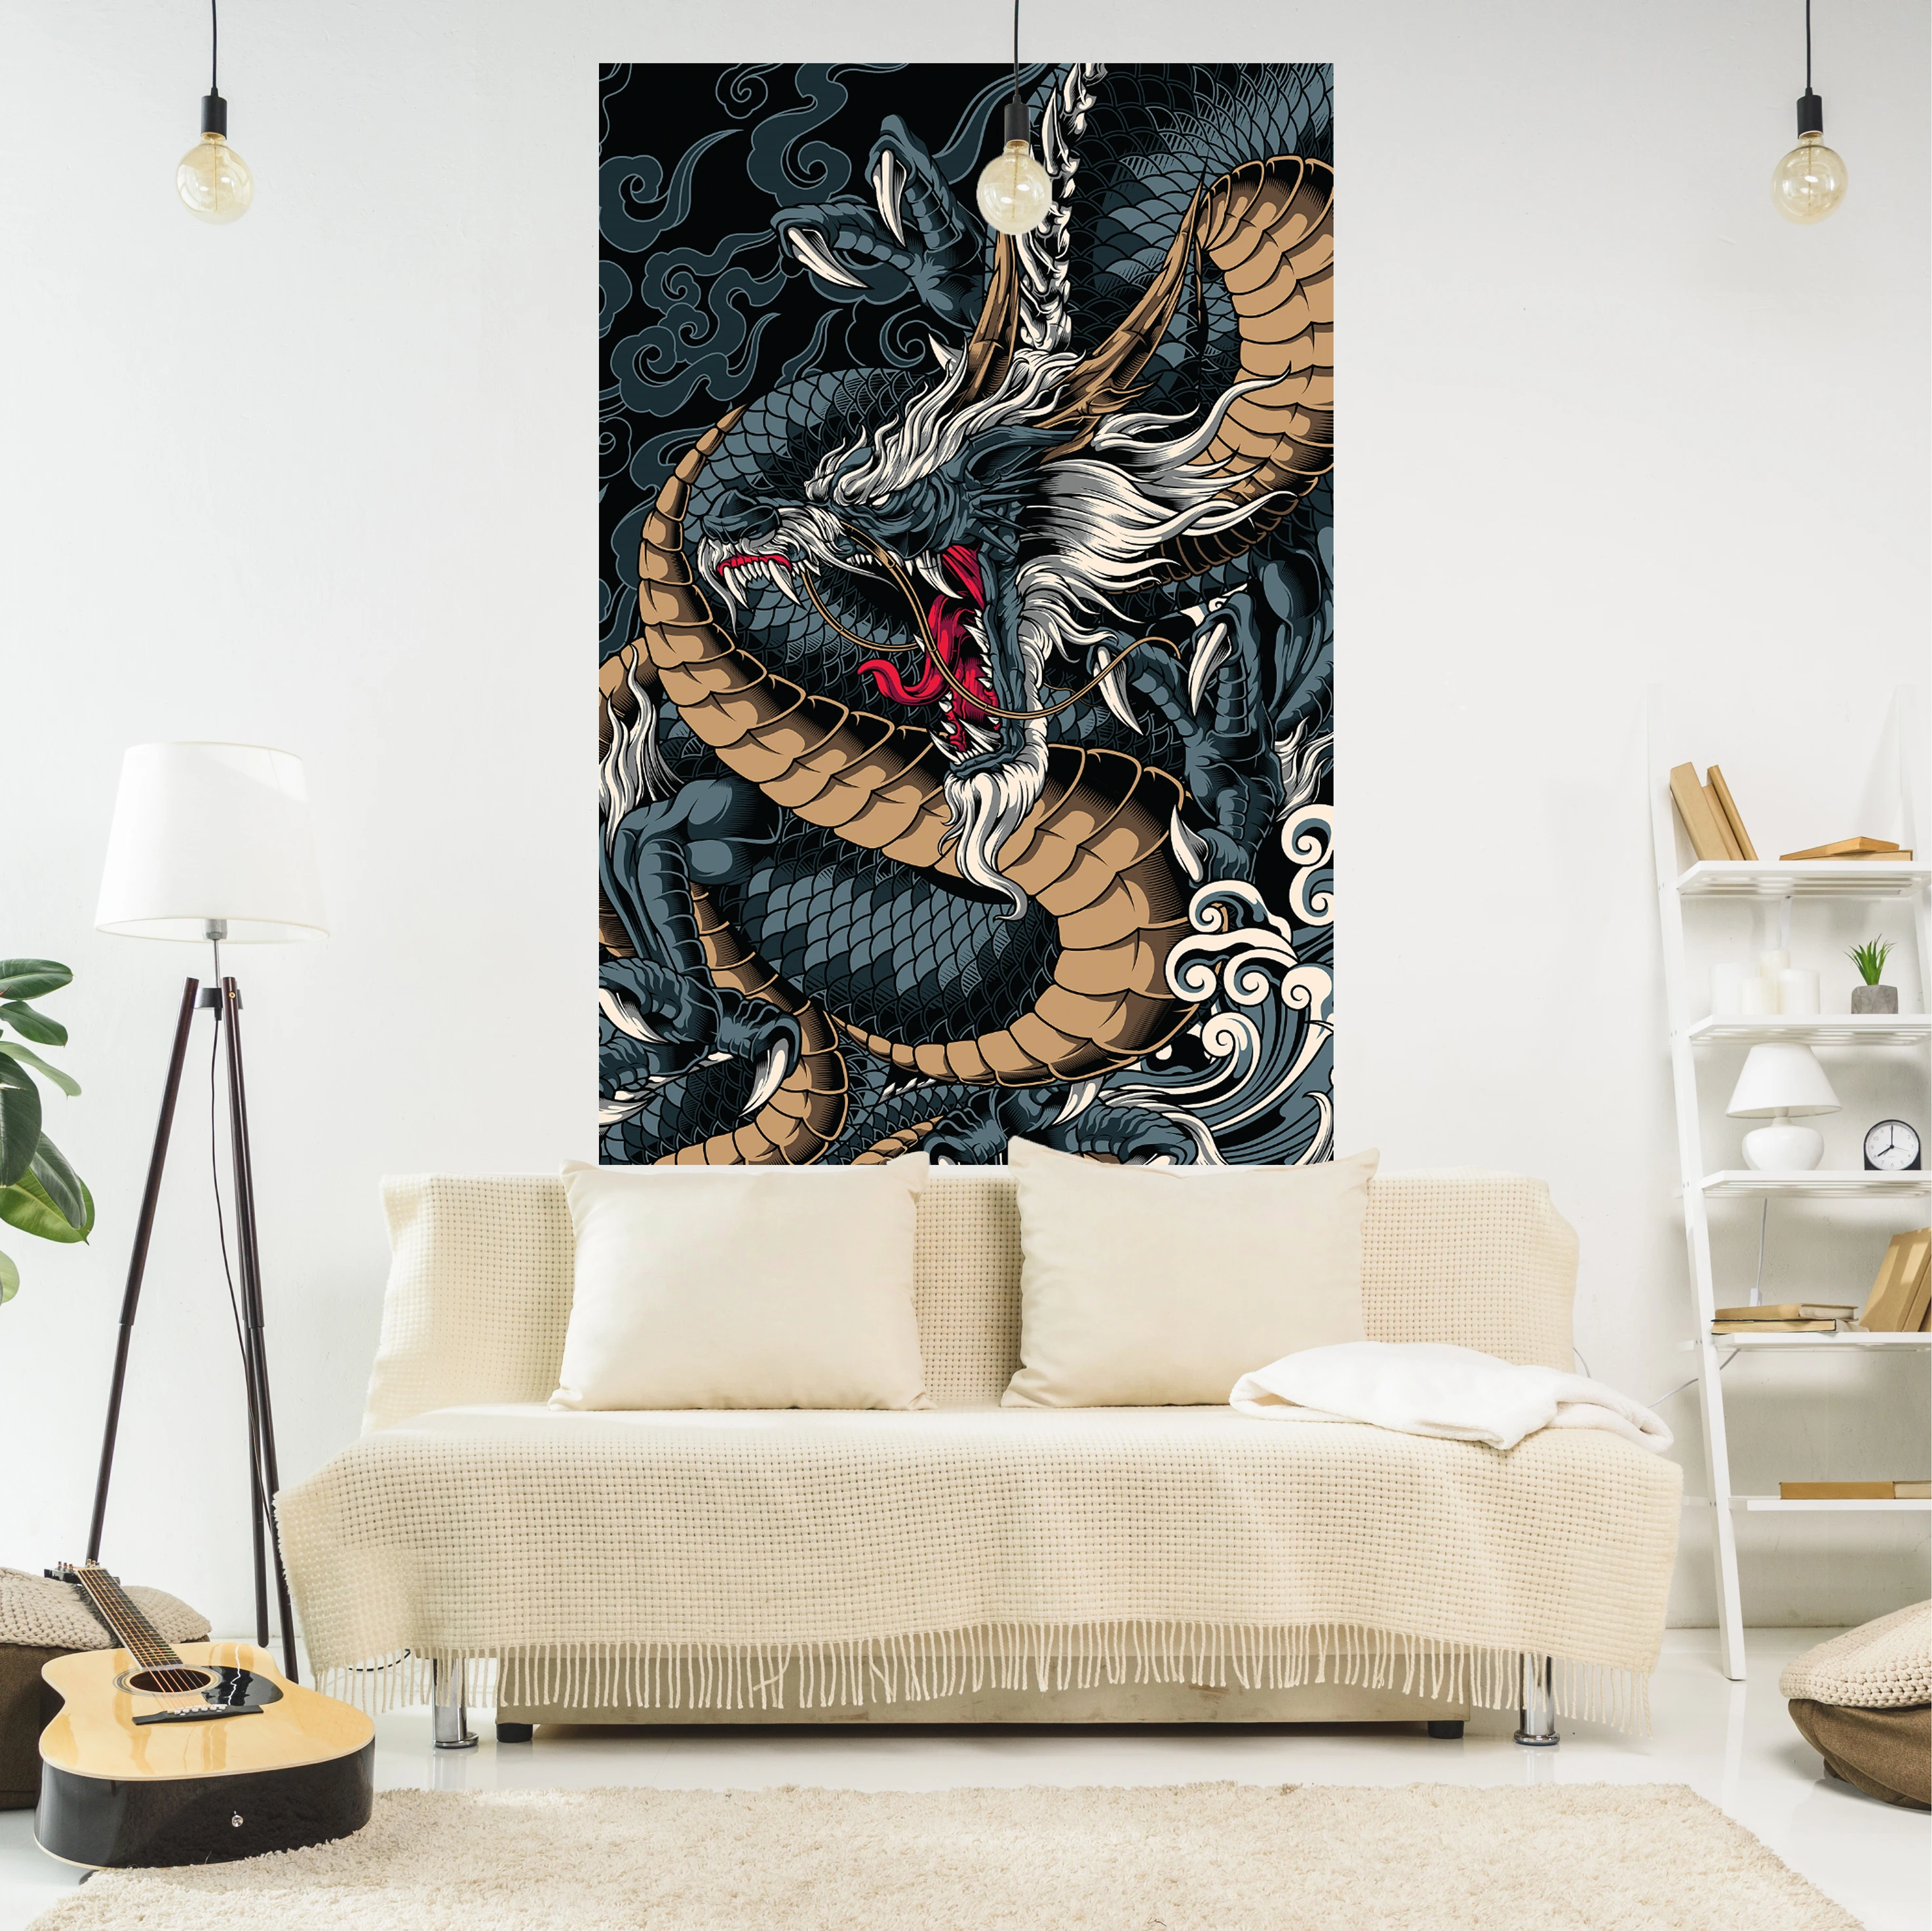 XxDeco Vintage Room Decor Tapestry Chinese Dragon Totem Printed Wall Hanging Carpets Bedroom Or Home For Decoration